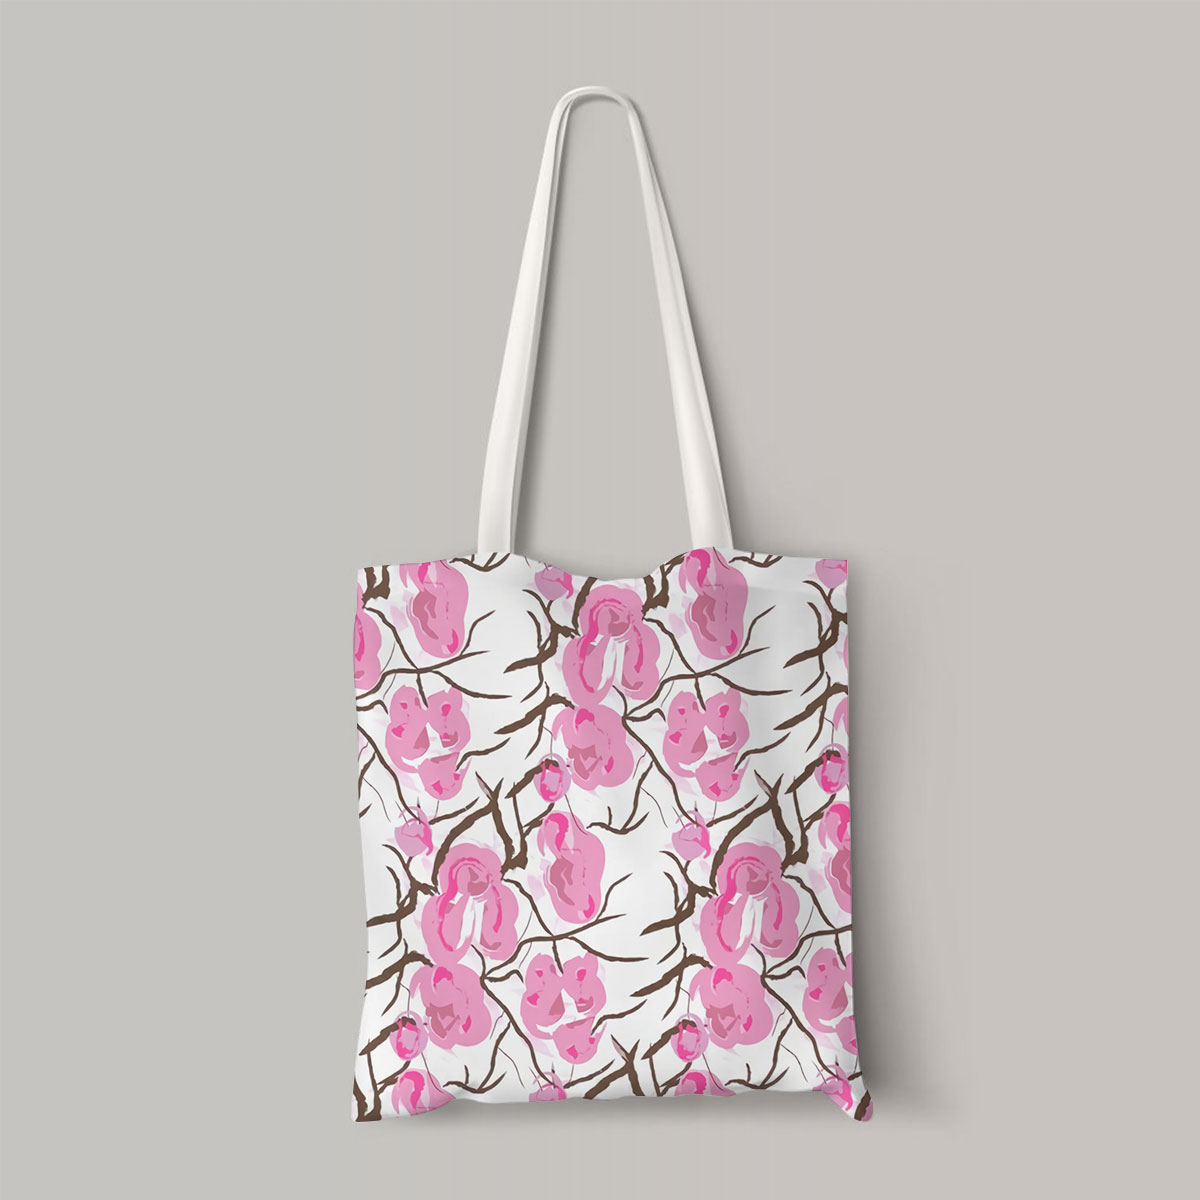 Abstract Cherry Blossom Totebag